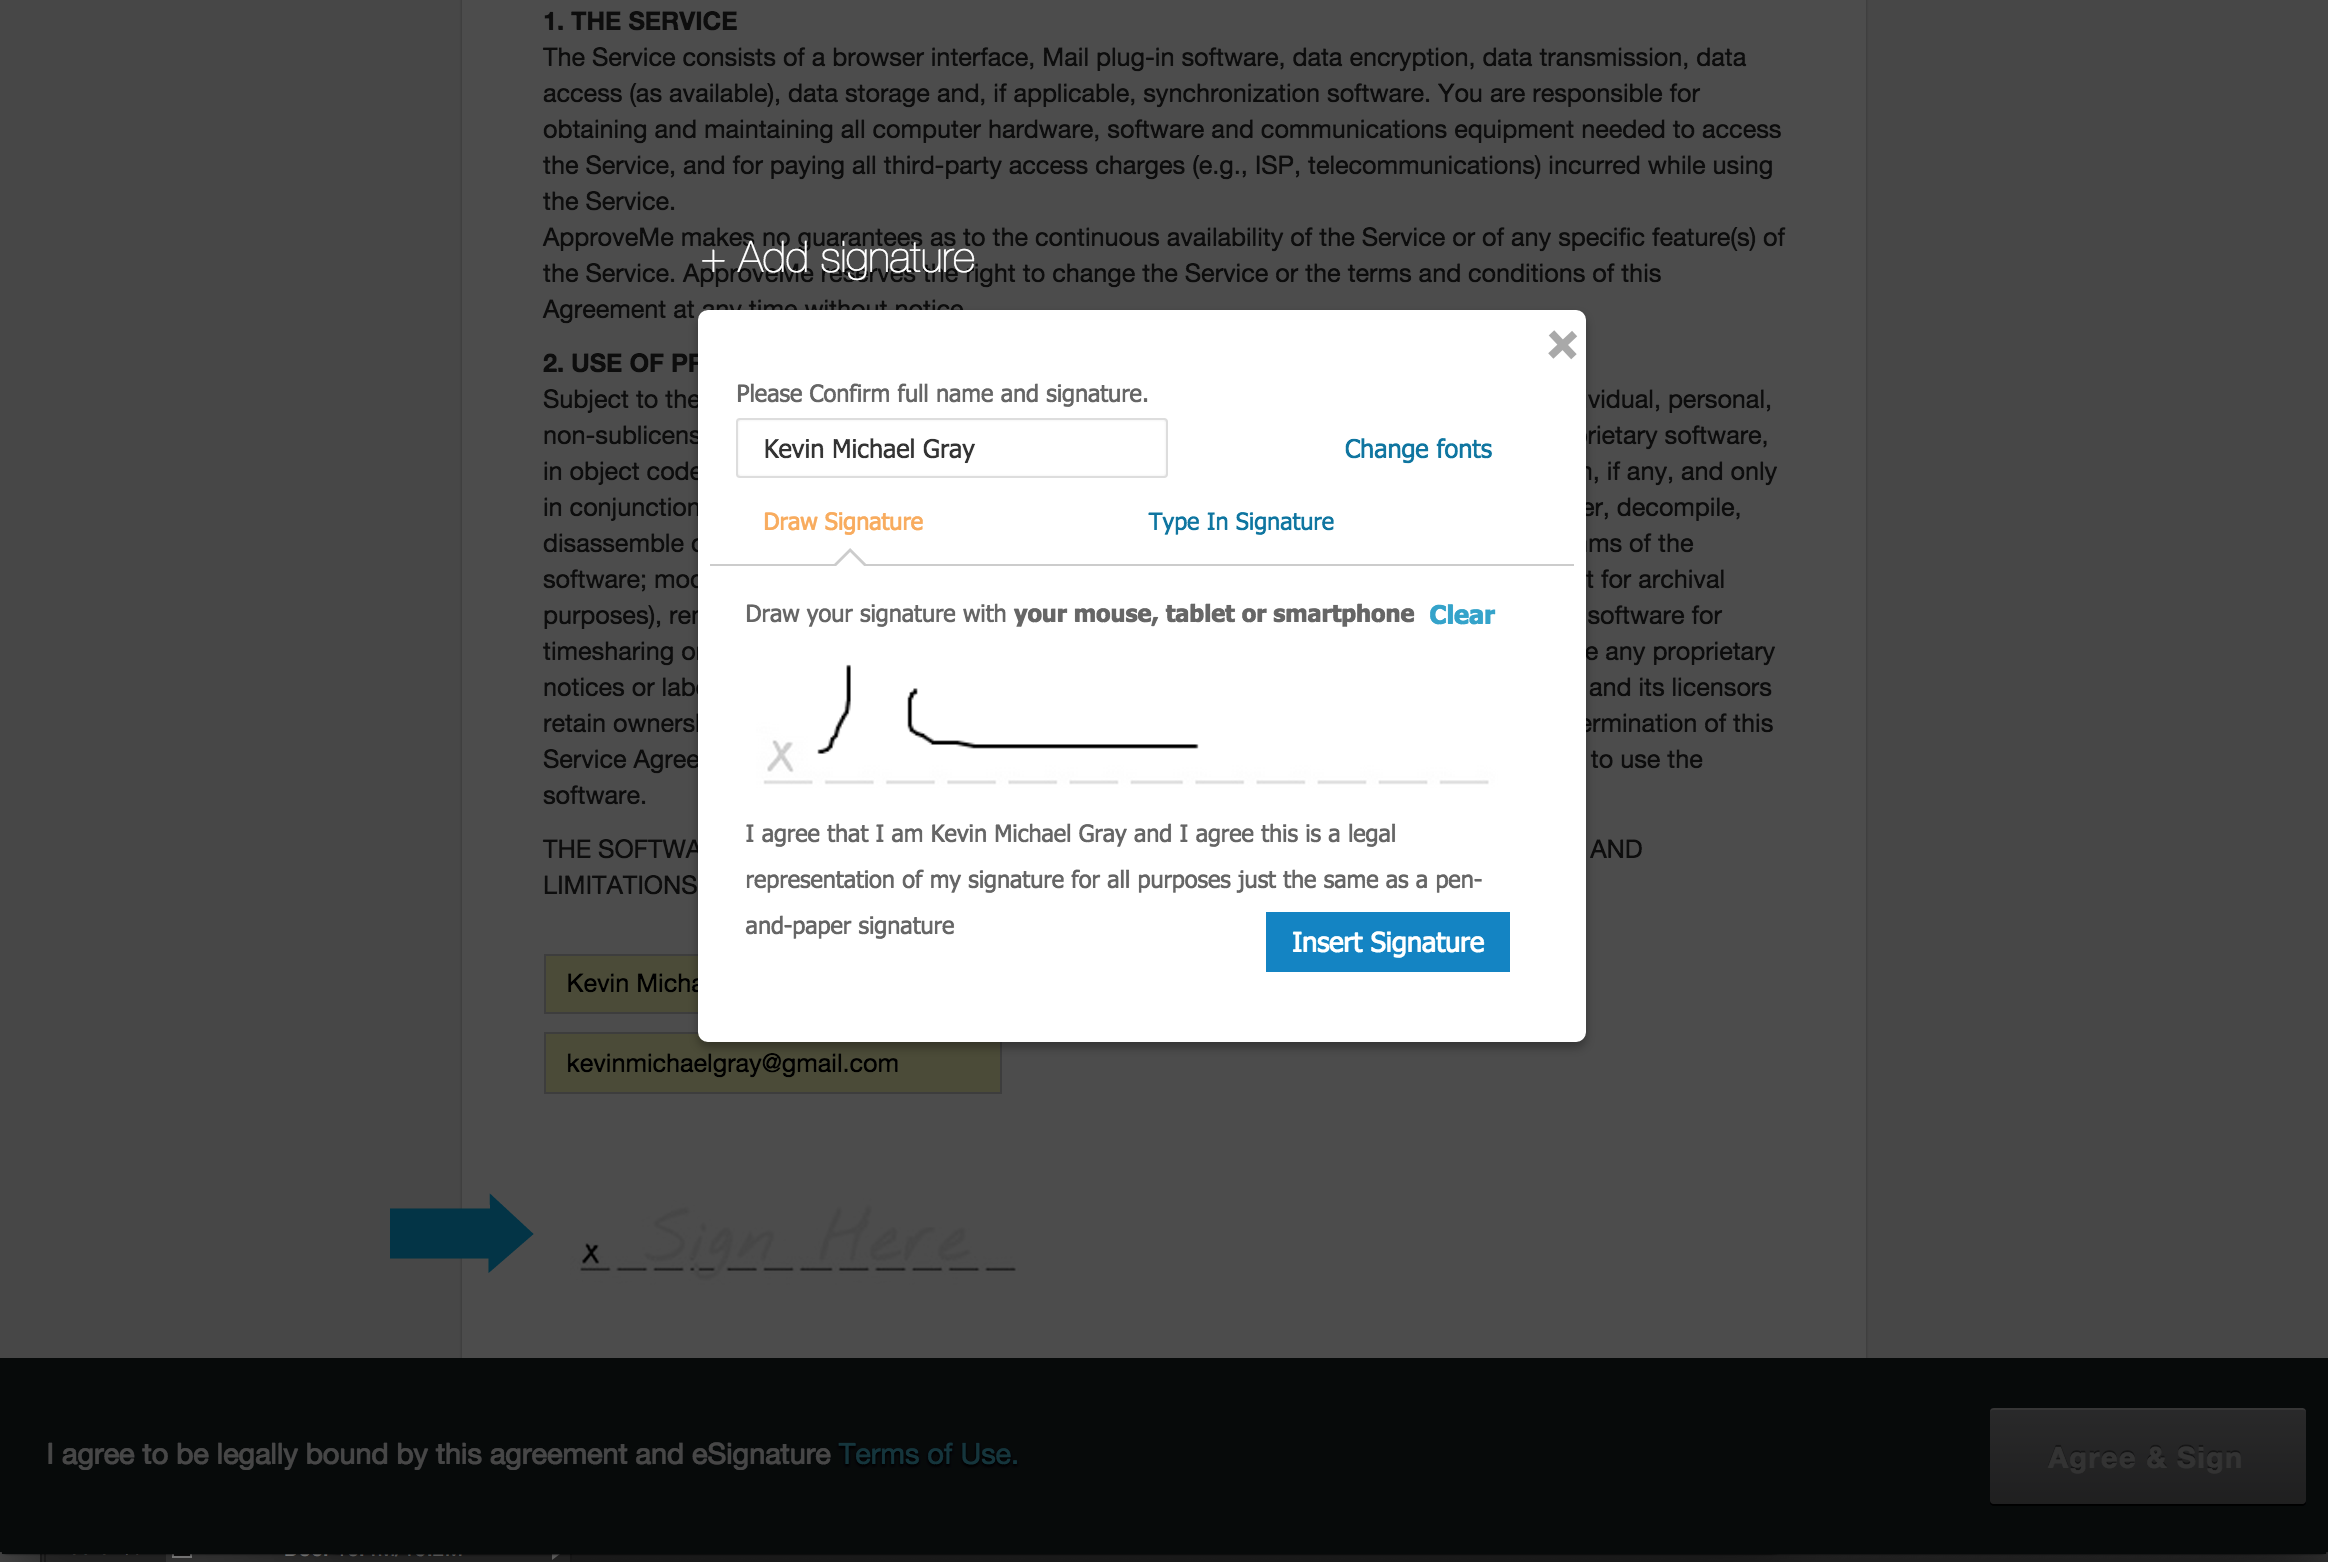 **Choose Your Fluent Forms Fields:** After selecting your WP Form you will see the available field options from this particular WP Form. You can easily insert data from your WP Form anywhere in this new contract.